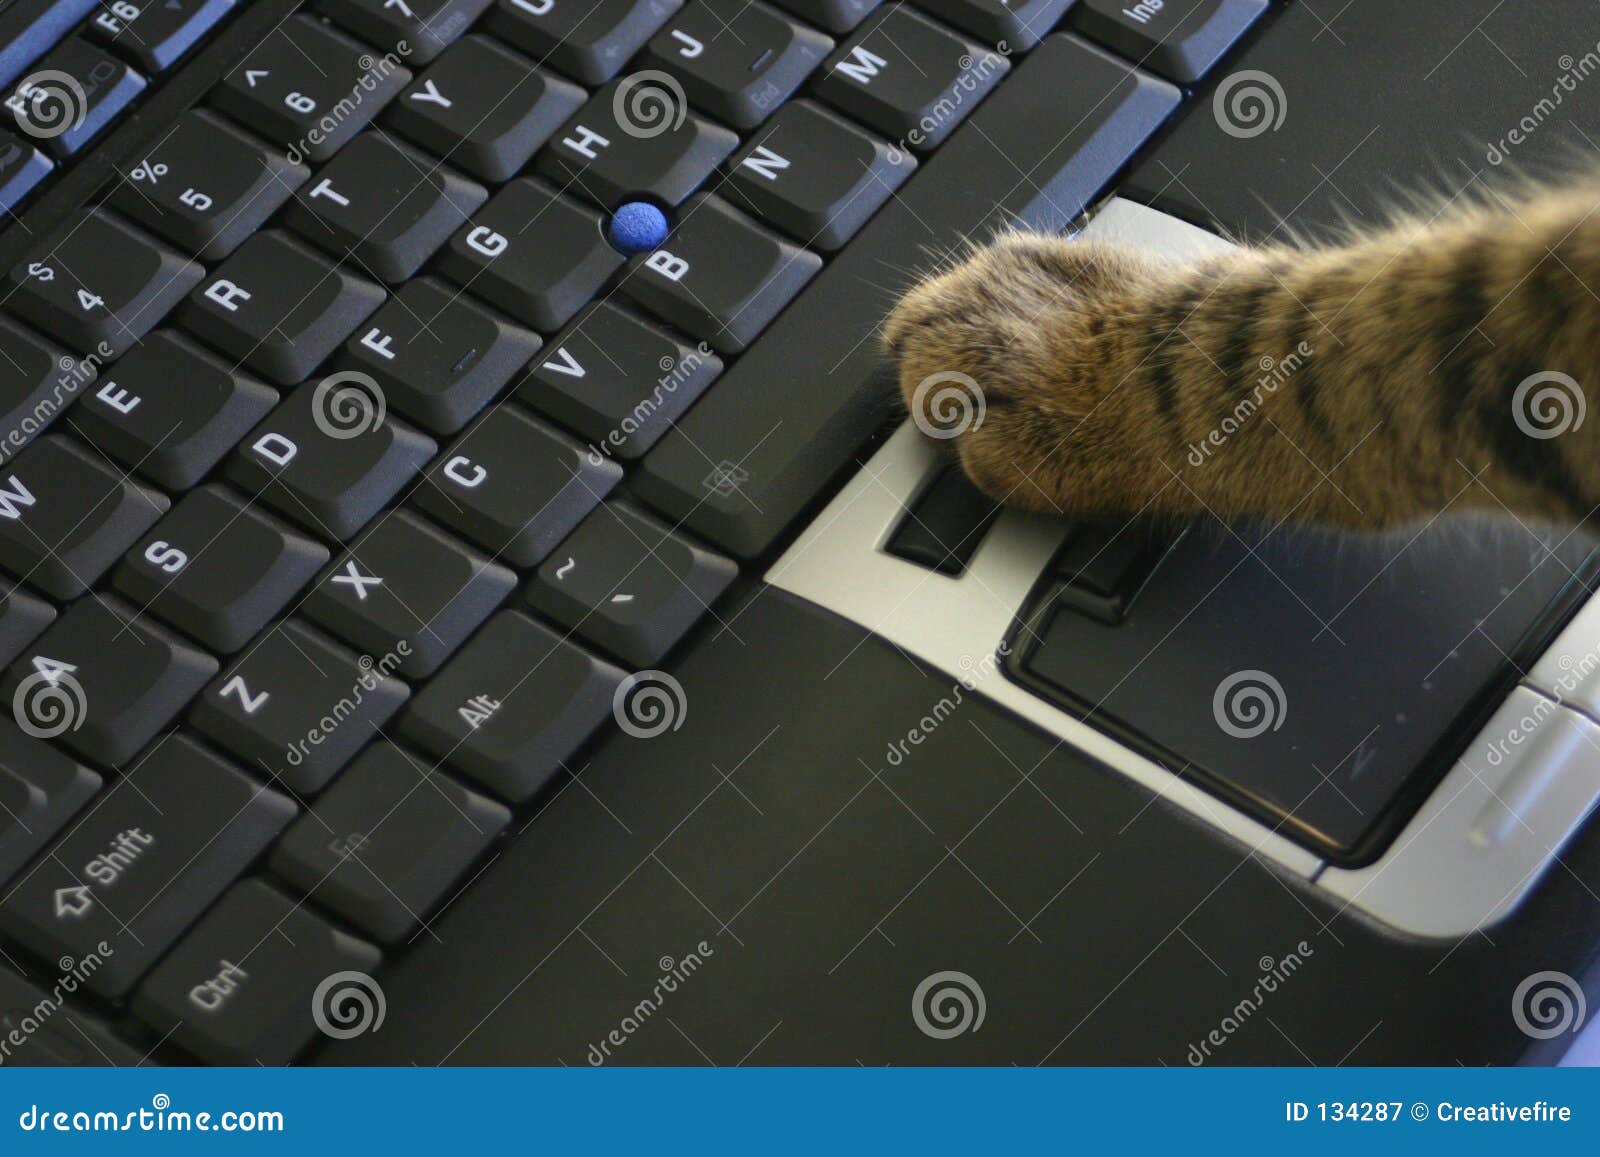  Cat  click  laptop mouse stock image Image of kitten 